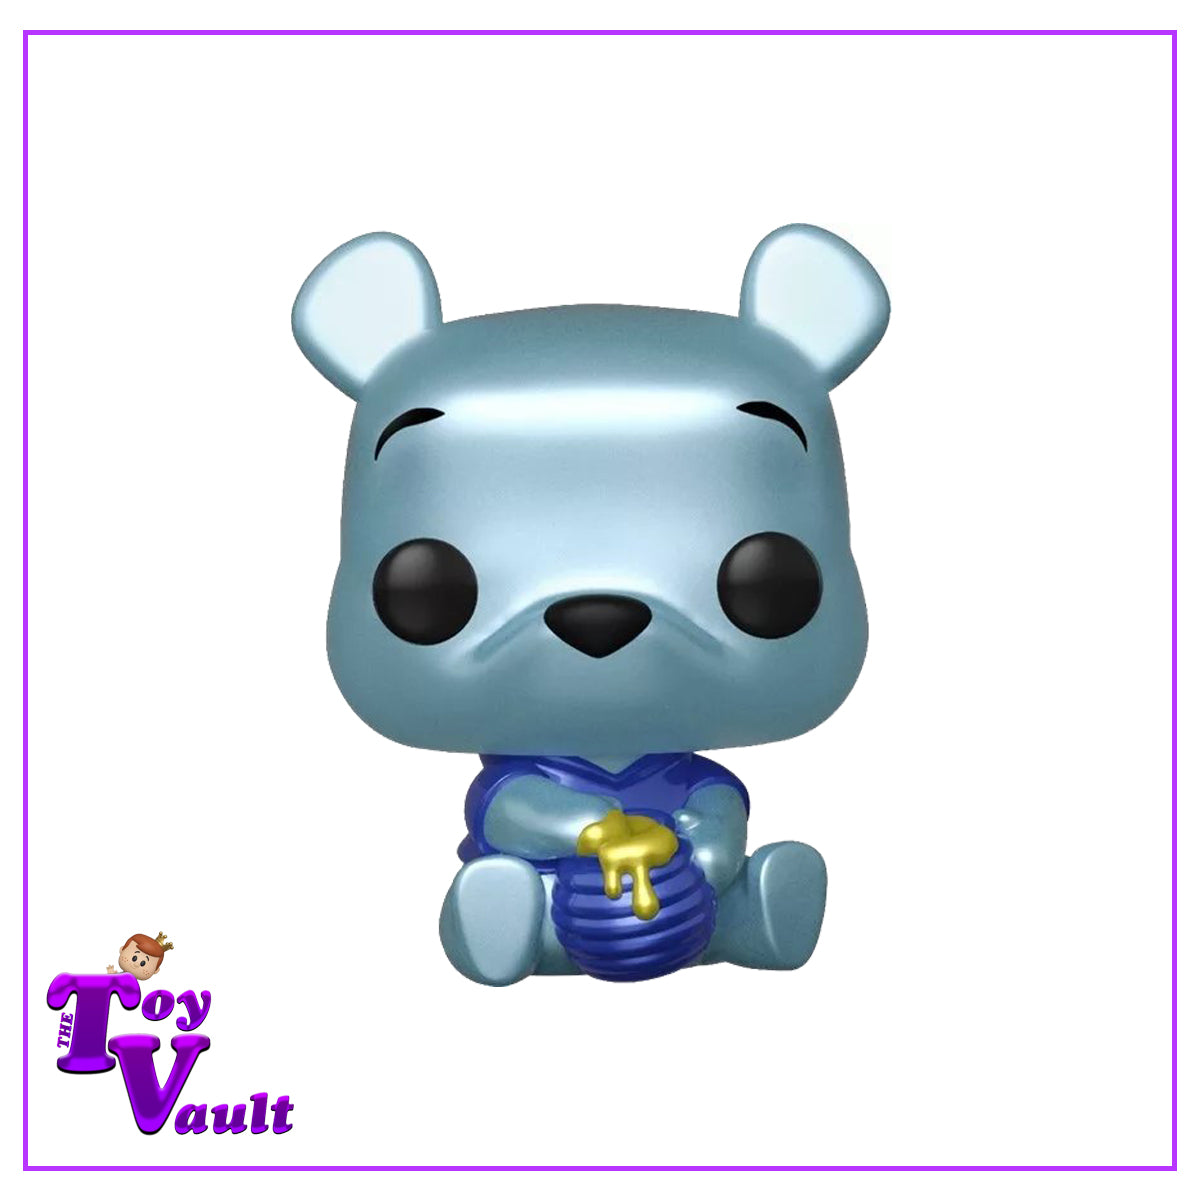 Funko Pop! Disney Make a Wish - Winnie the Pooh (Blue) SE Pops with Purpose Hot Topic Exclusive